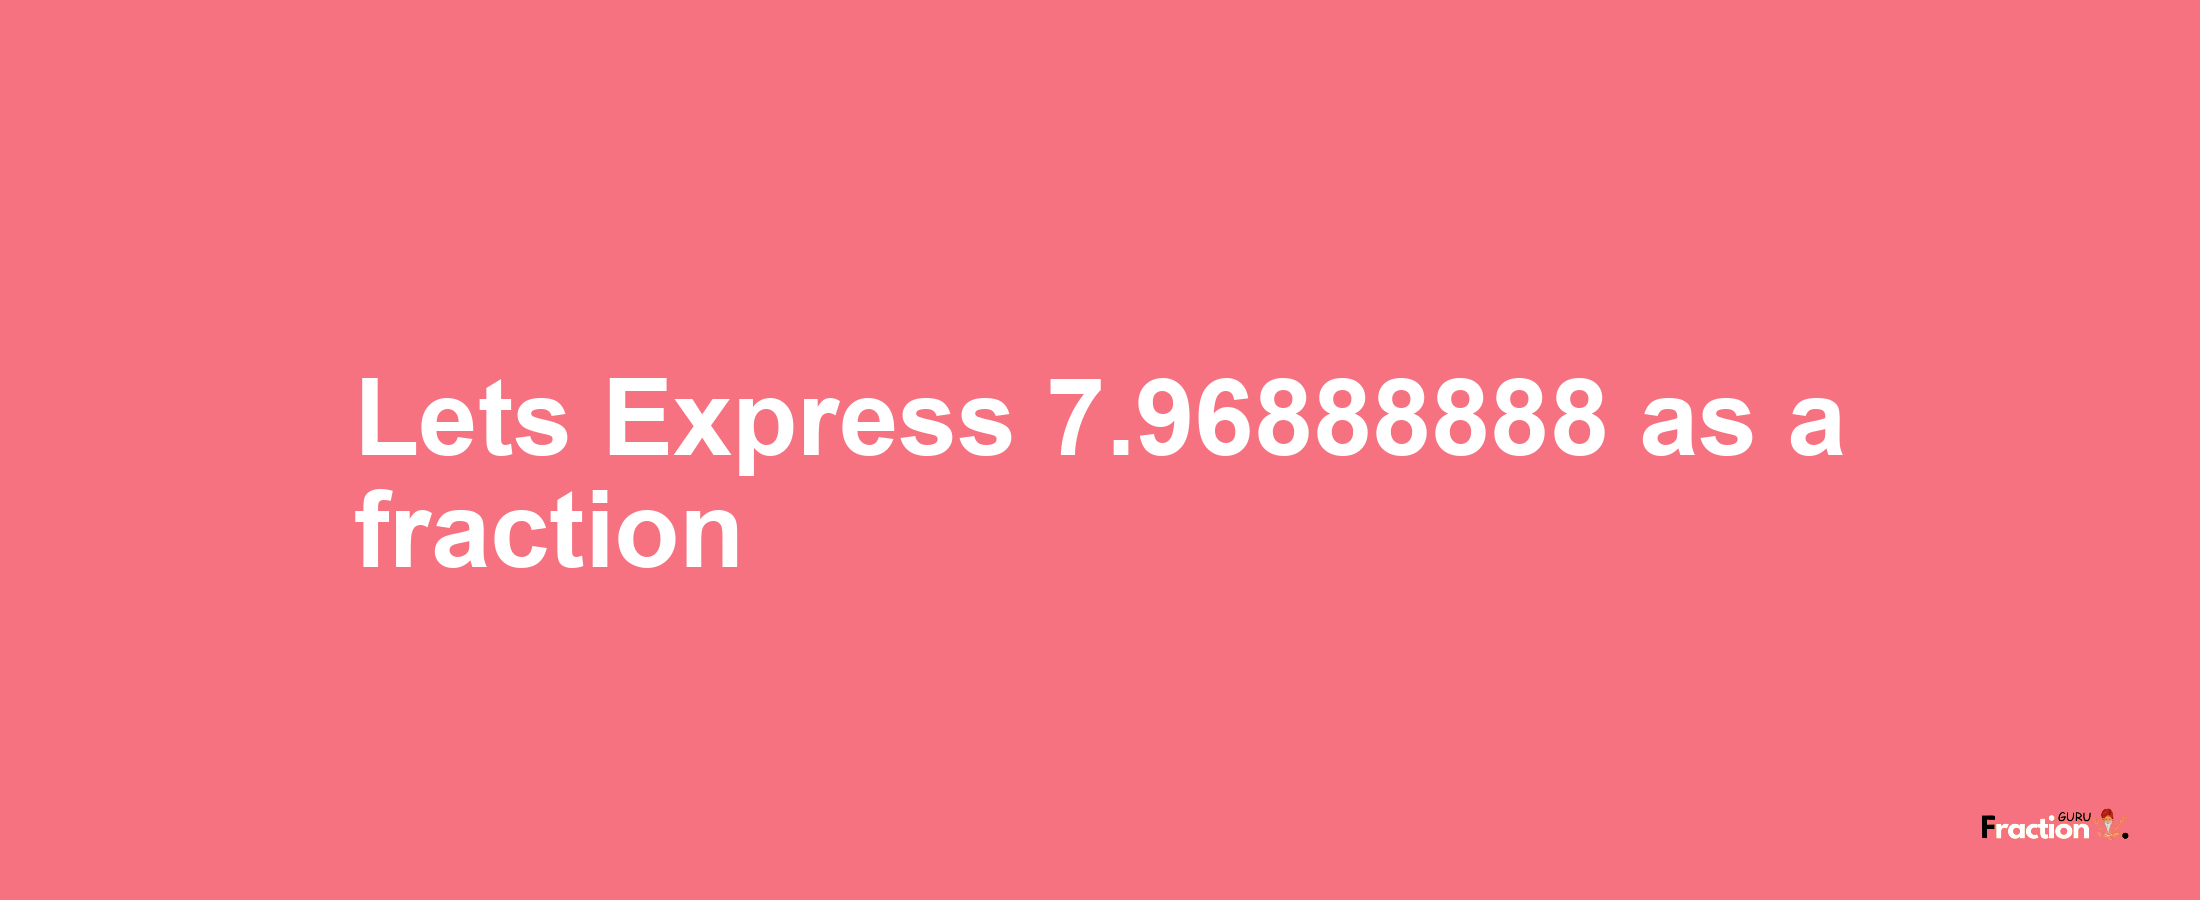 Lets Express 7.96888888 as afraction